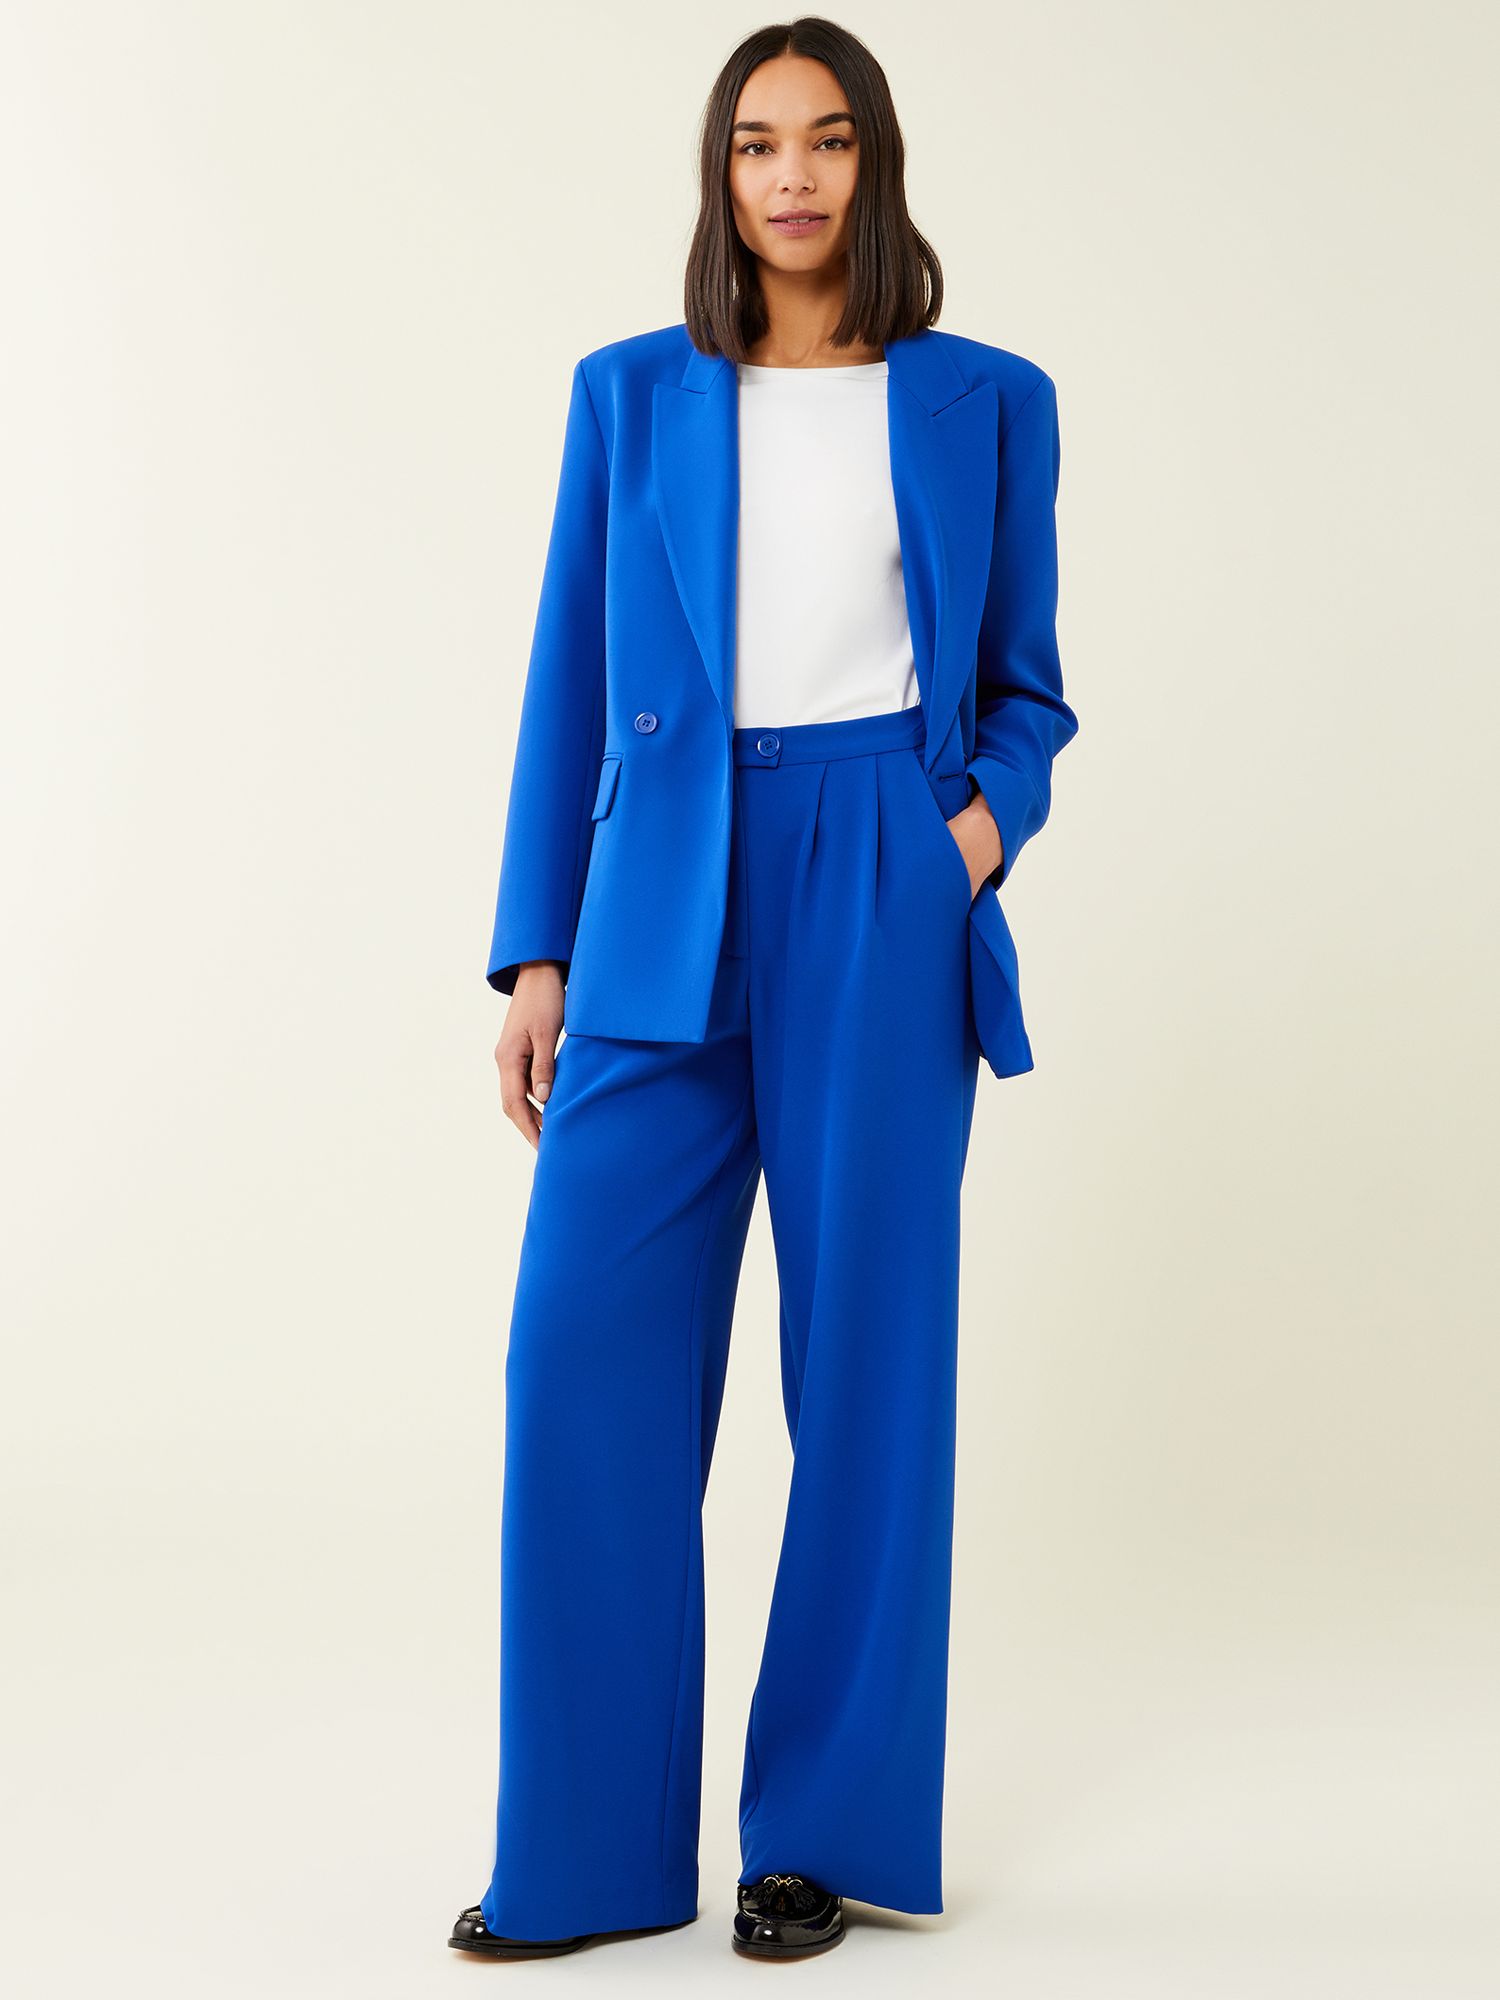 Finery Maeve Double Breasted Blazer, Cobalt Blue at John Lewis & Partners